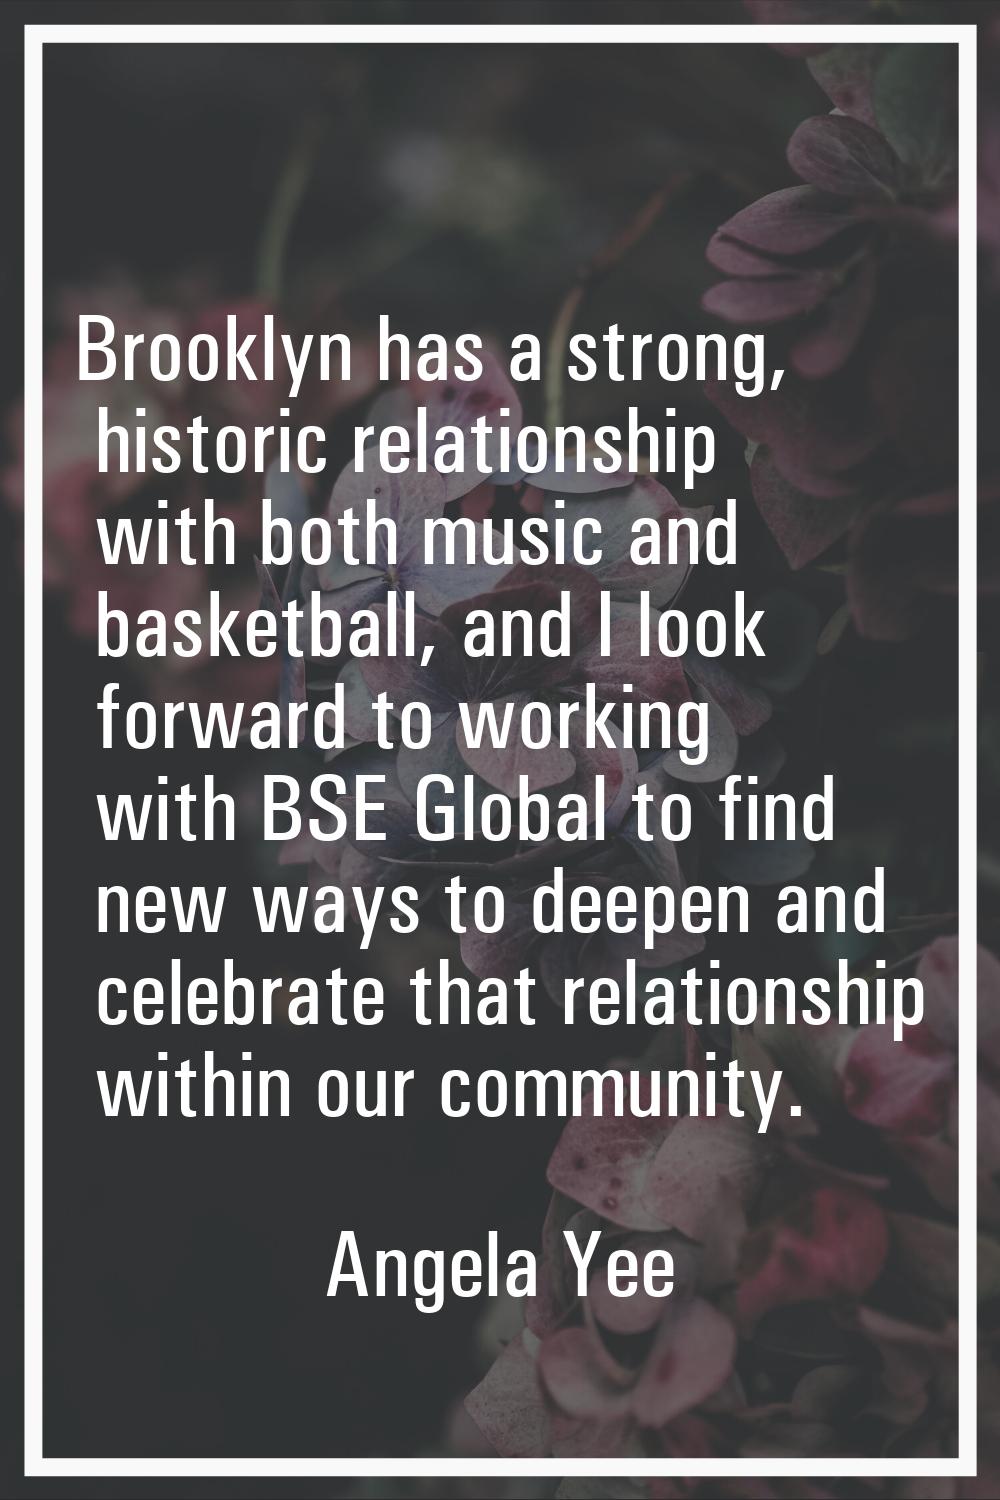 Brooklyn has a strong, historic relationship with both music and basketball, and I look forward to 